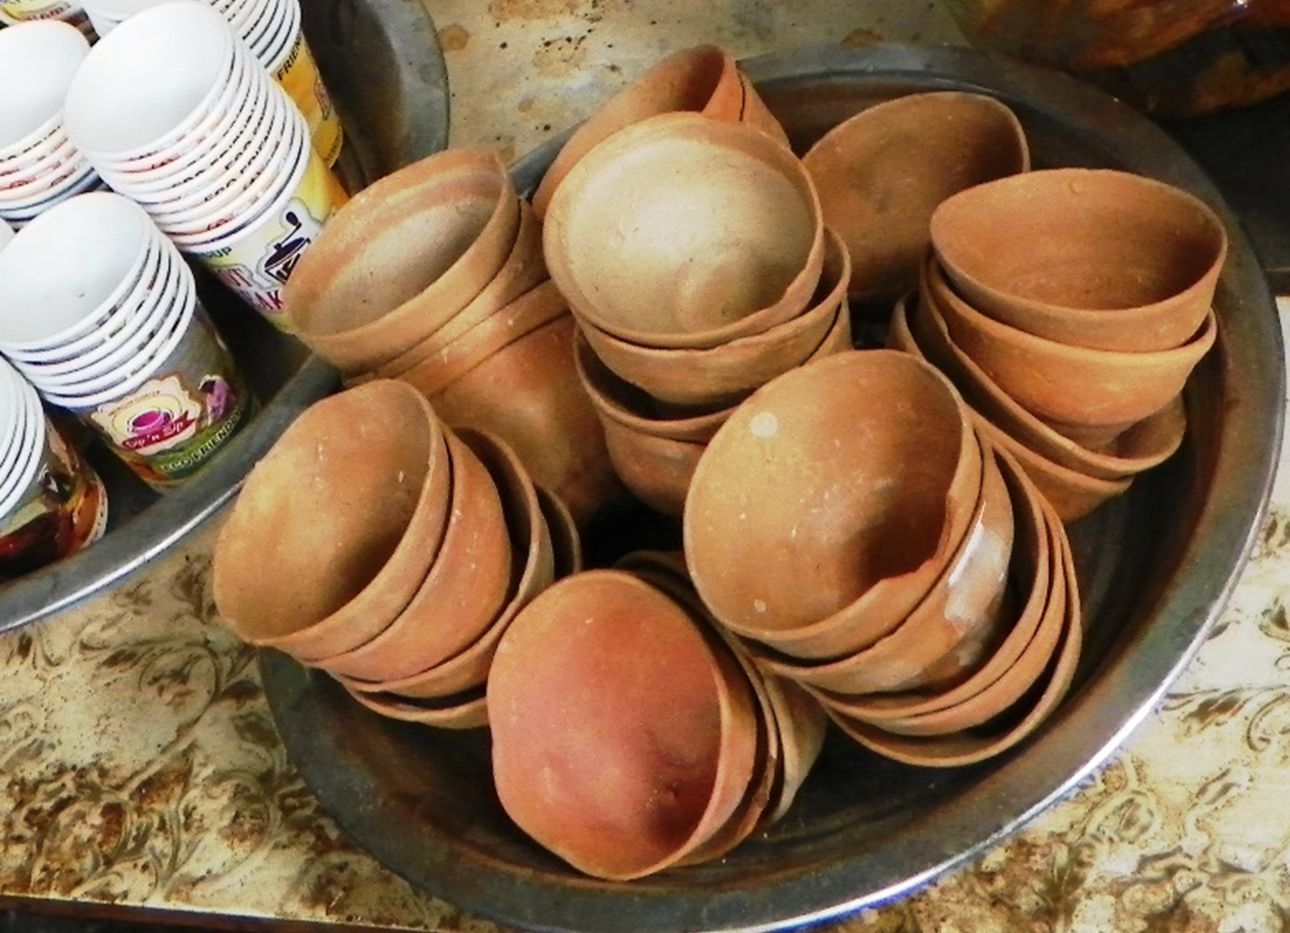 Several stacks of bhar on a tray next to paper cups.